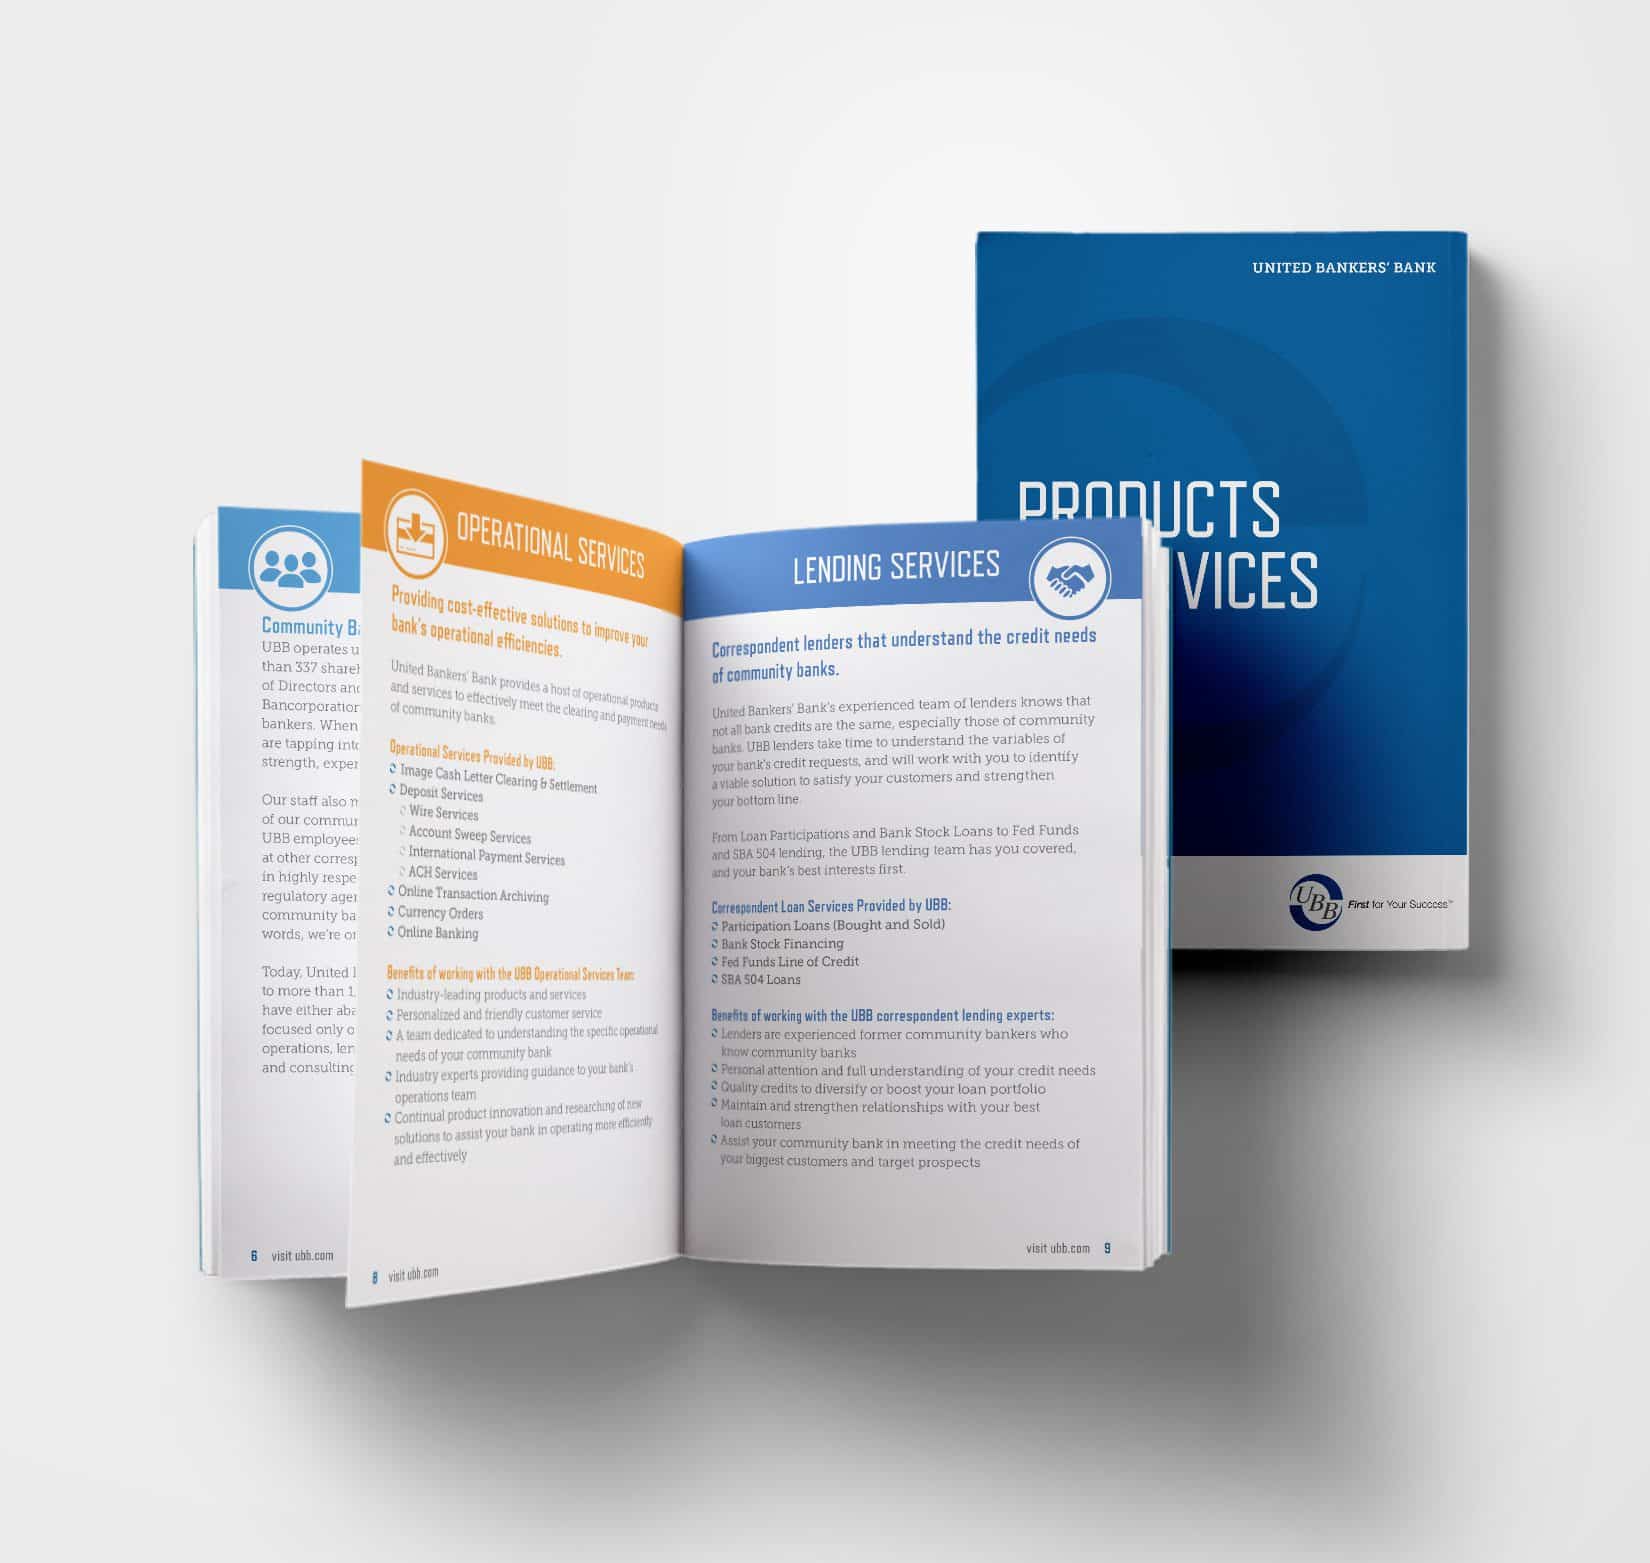 Two designed and printed booklets for United Bankers’ Bank on a white background